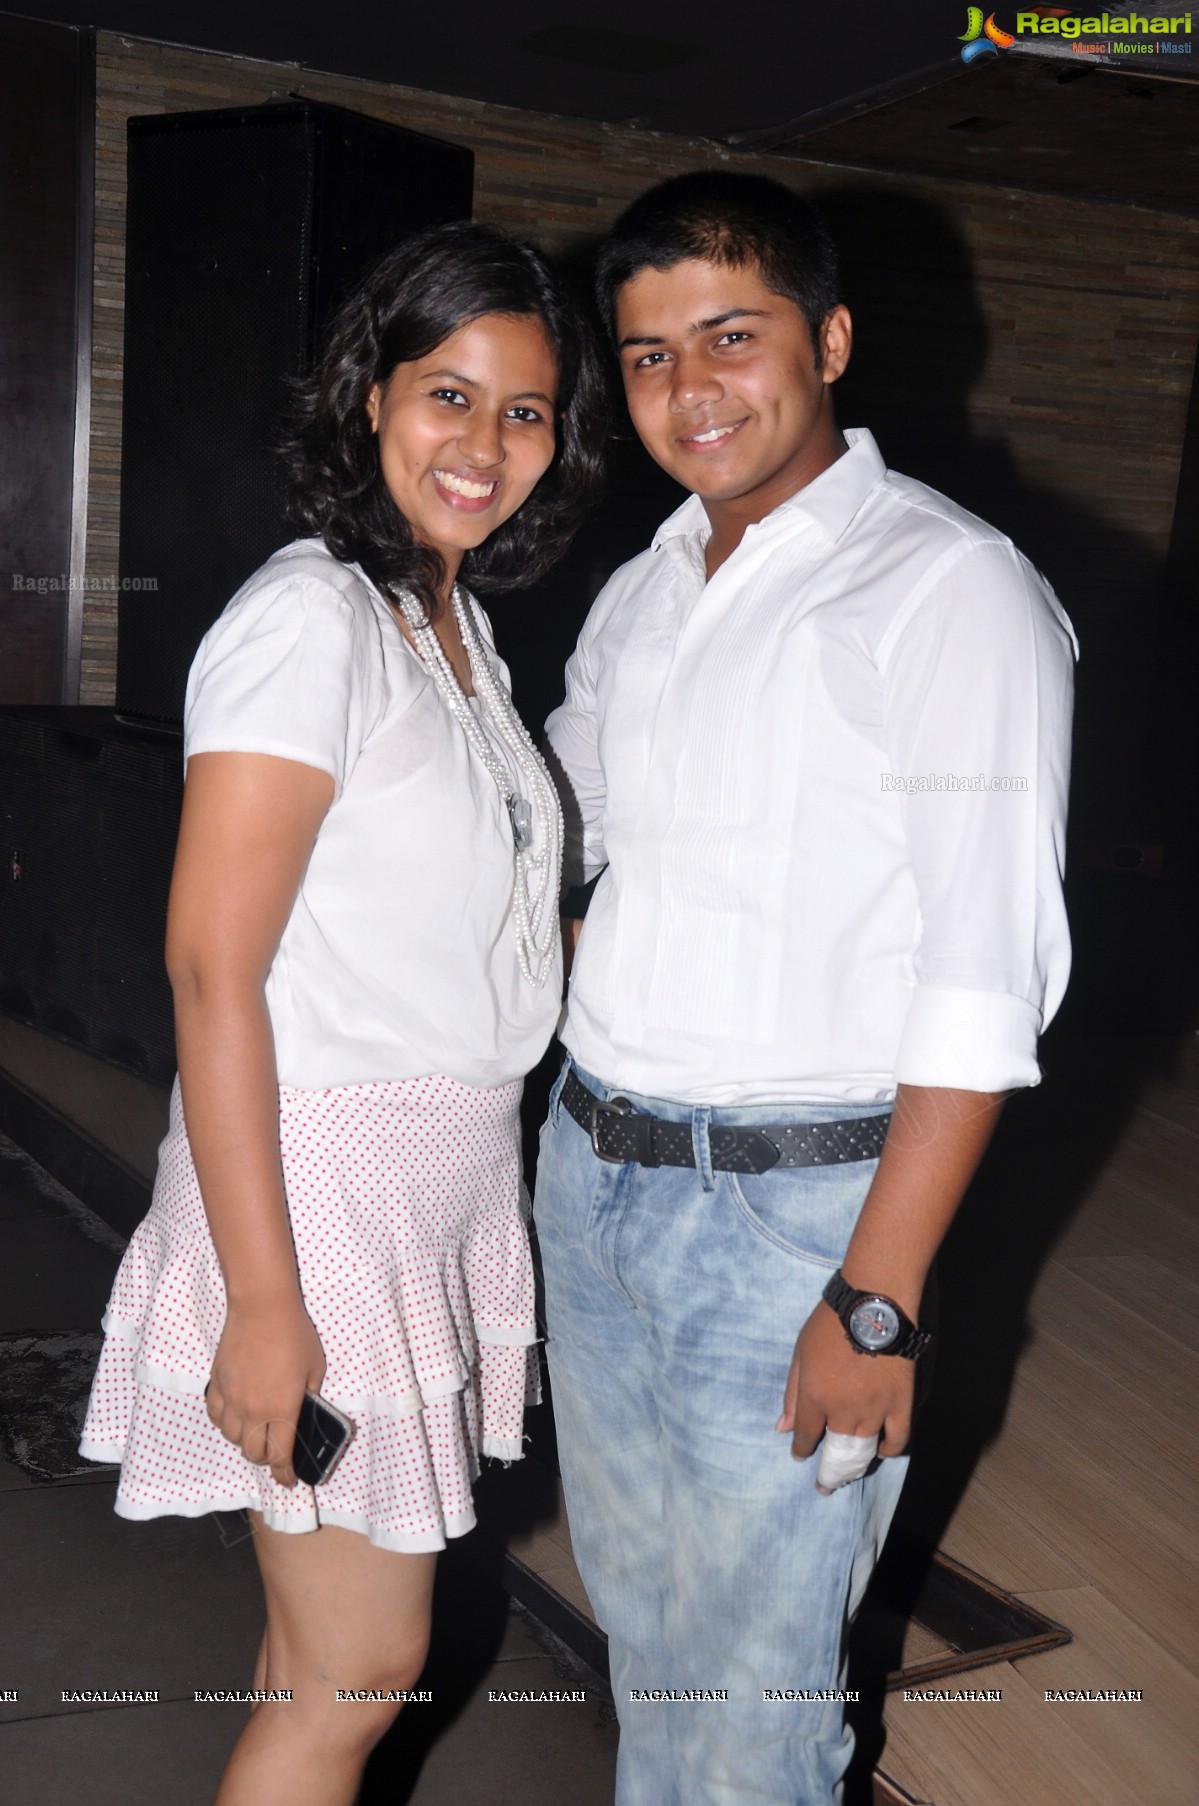 JCI Hyderabad Deccan's White Party at Sky Bar, Hyderabad